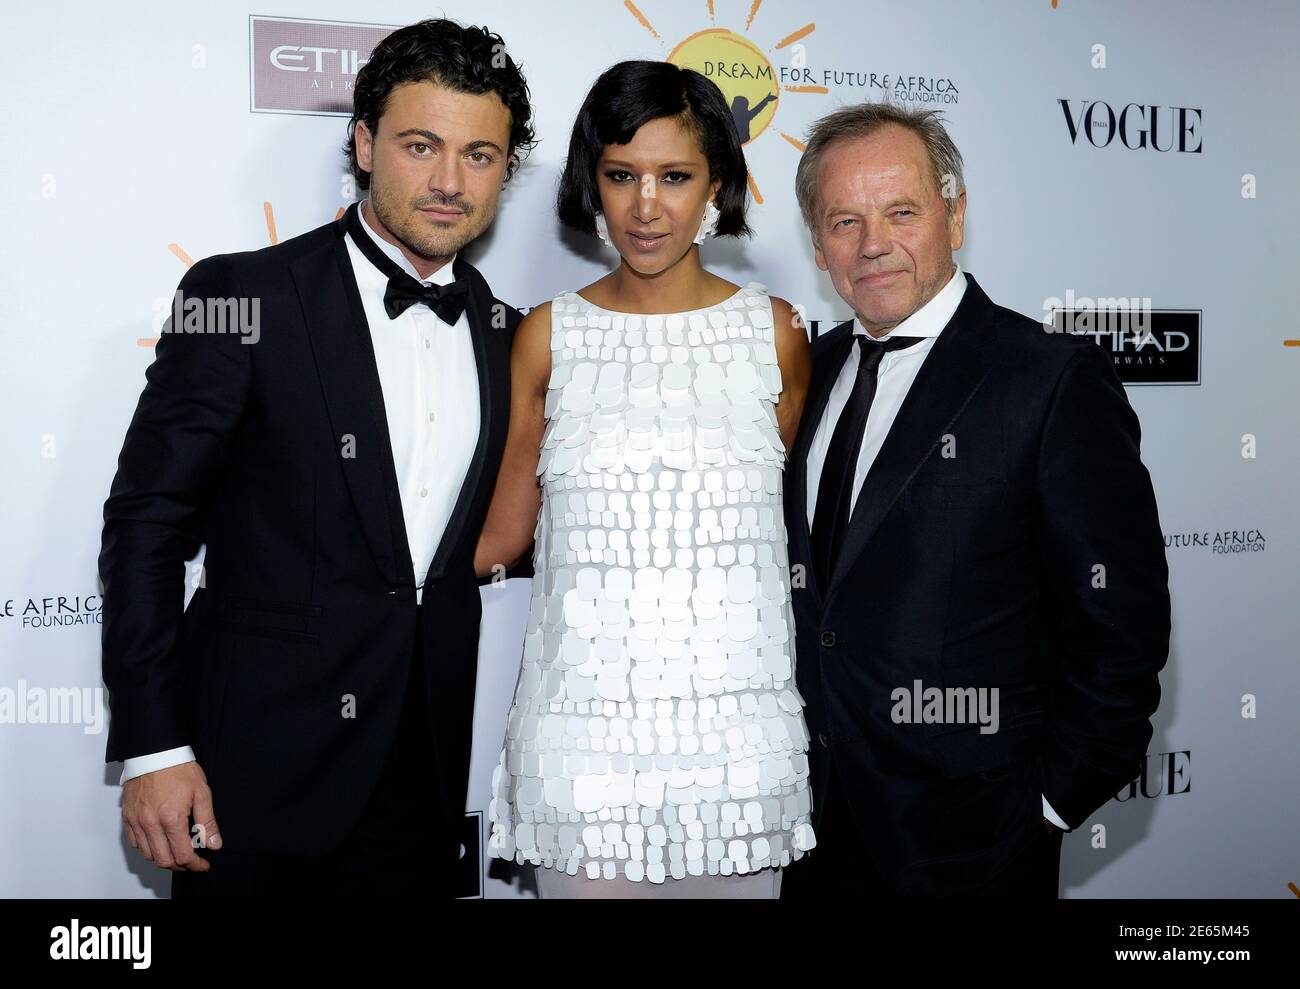 Italian operatic tenor Vittorio Grigolo (L-R), host Gelila Assefa and her husband, celebrity chef Wolfgang Puck, attend the Dream For Future Africa Foundation inaugural gala to honor Franca Sozzani, Vogue Italia Editor-In-Chief, in Beverly Hills ,California, October 24, 2013.  REUTERS/Kevork Djansezian  (UNITED STATES - Tags: ENTERTAINMENT FOOD) Stock Photo